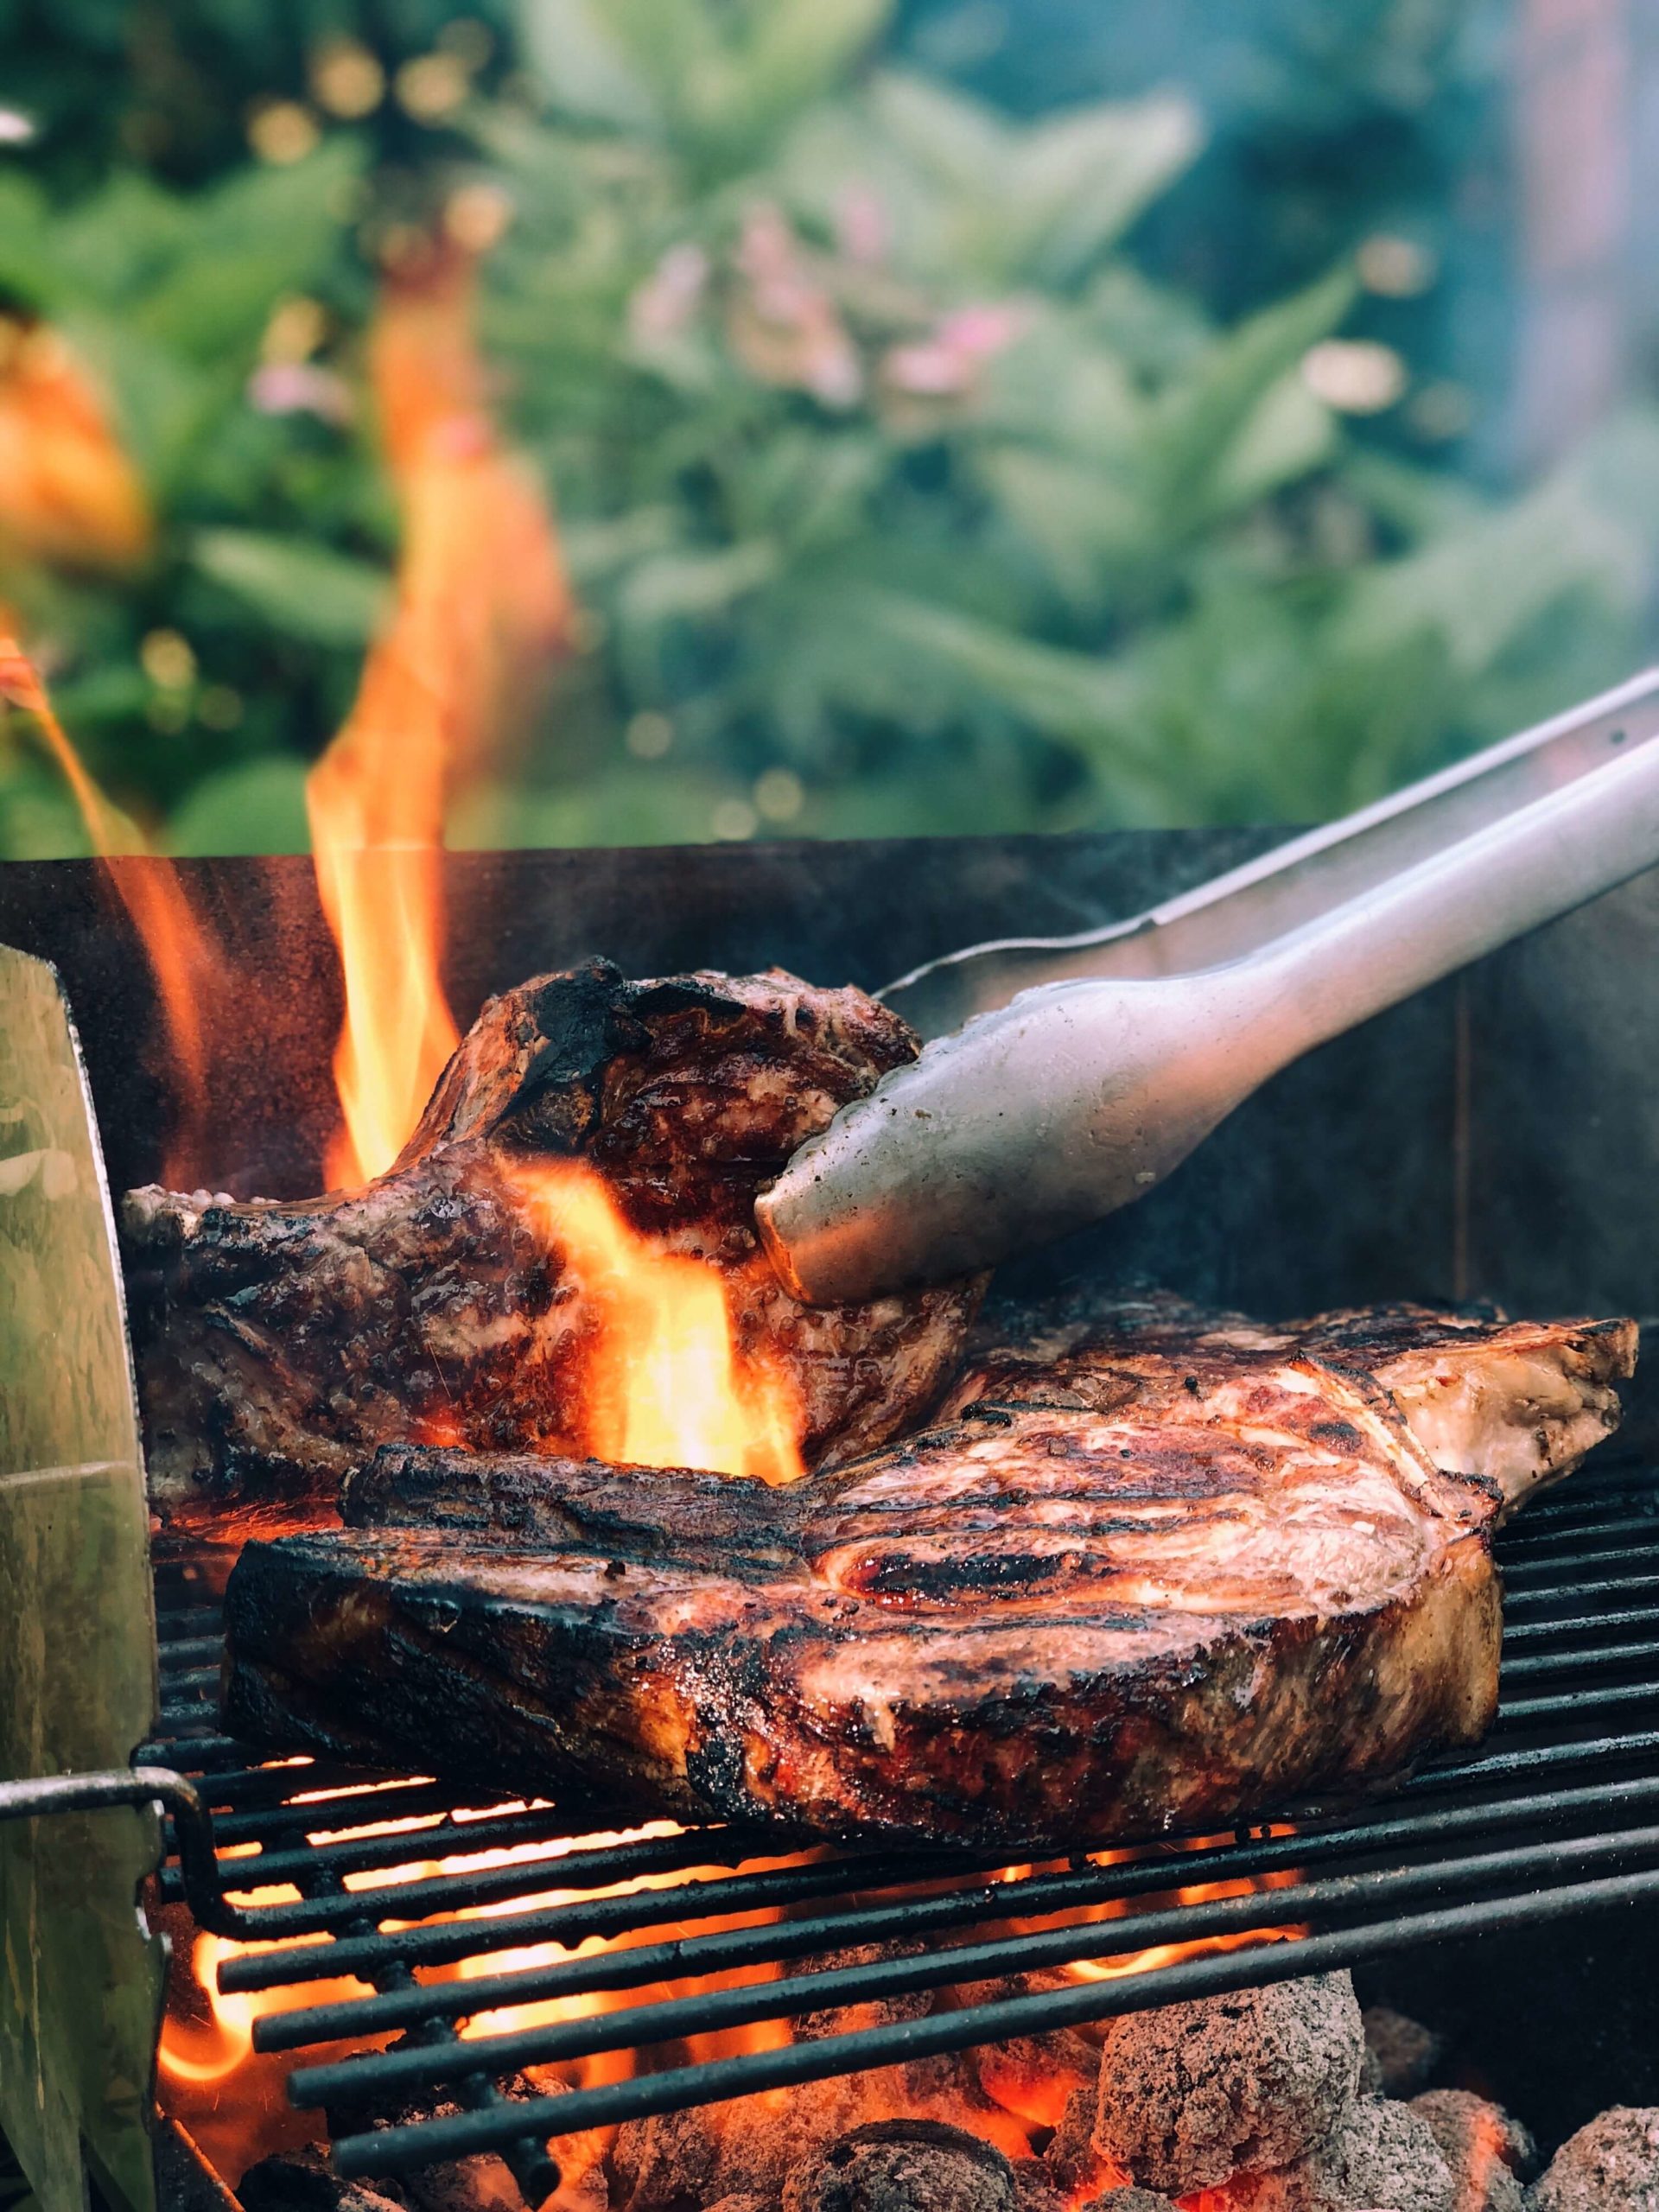 Steaks on a grill being turned with tongs and flames around one steak